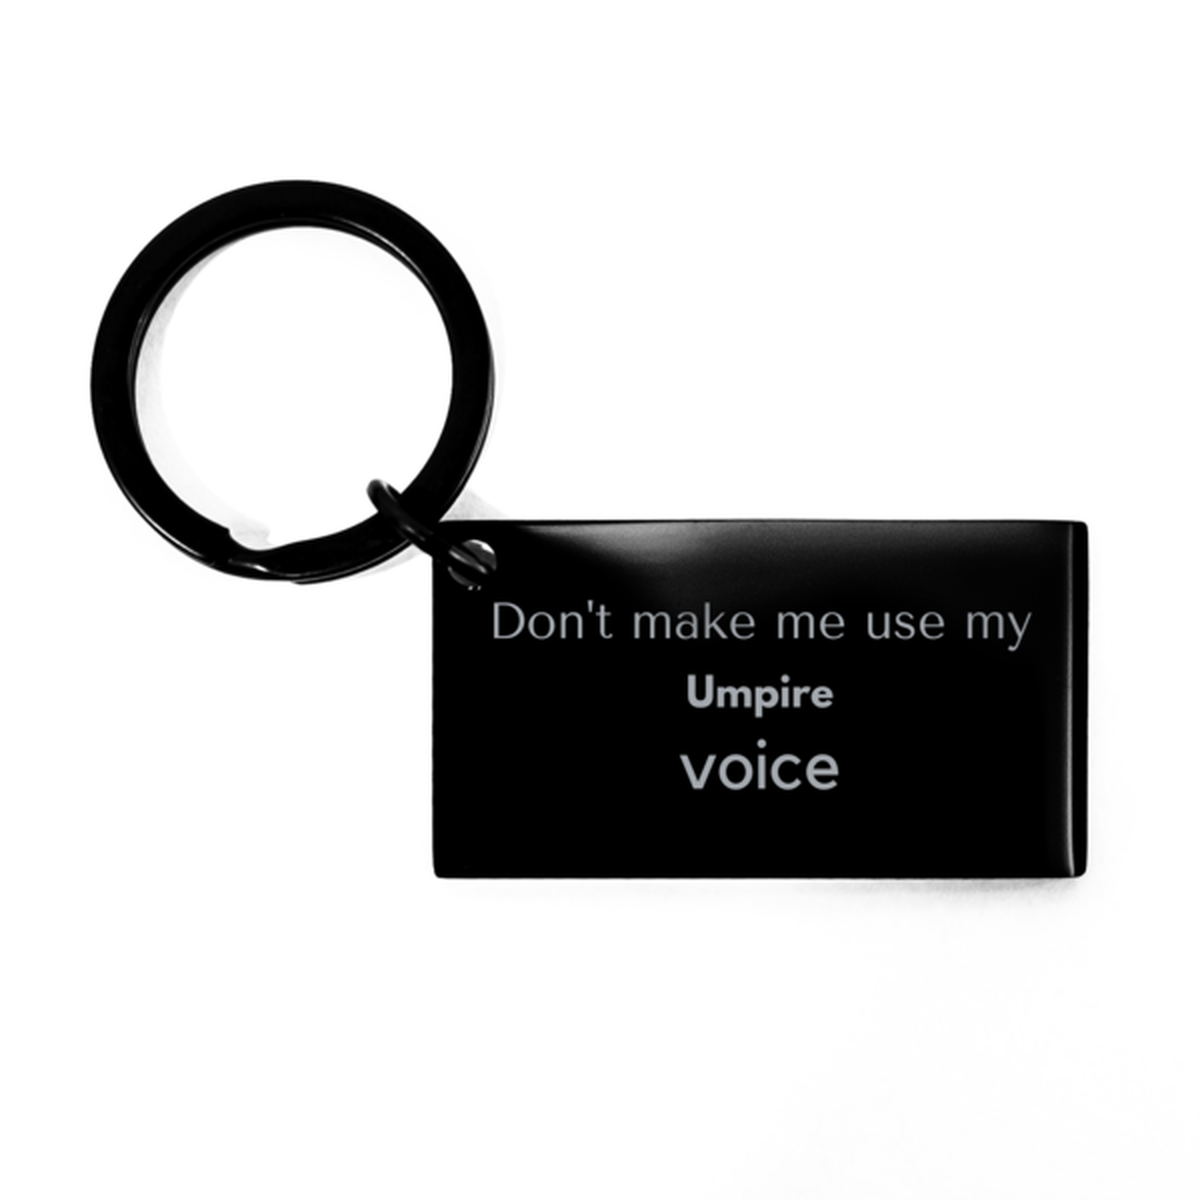 Don't make me use my Umpire voice, Sarcasm Umpire Gifts, Christmas Umpire Keychain Birthday Unique Gifts For Umpire Coworkers, Men, Women, Colleague, Friends